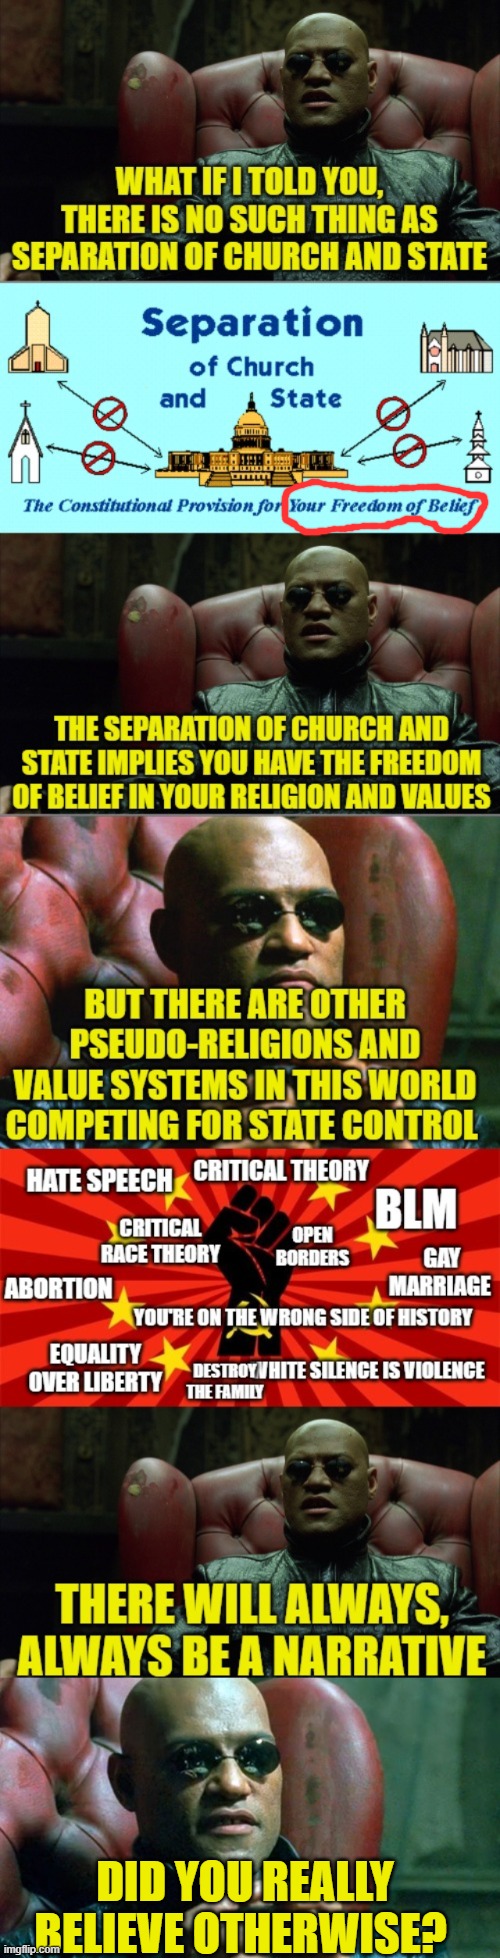 Separation of Church and State |  DID YOU REALLY BELIEVE OTHERWISE? | image tagged in political meme | made w/ Imgflip meme maker